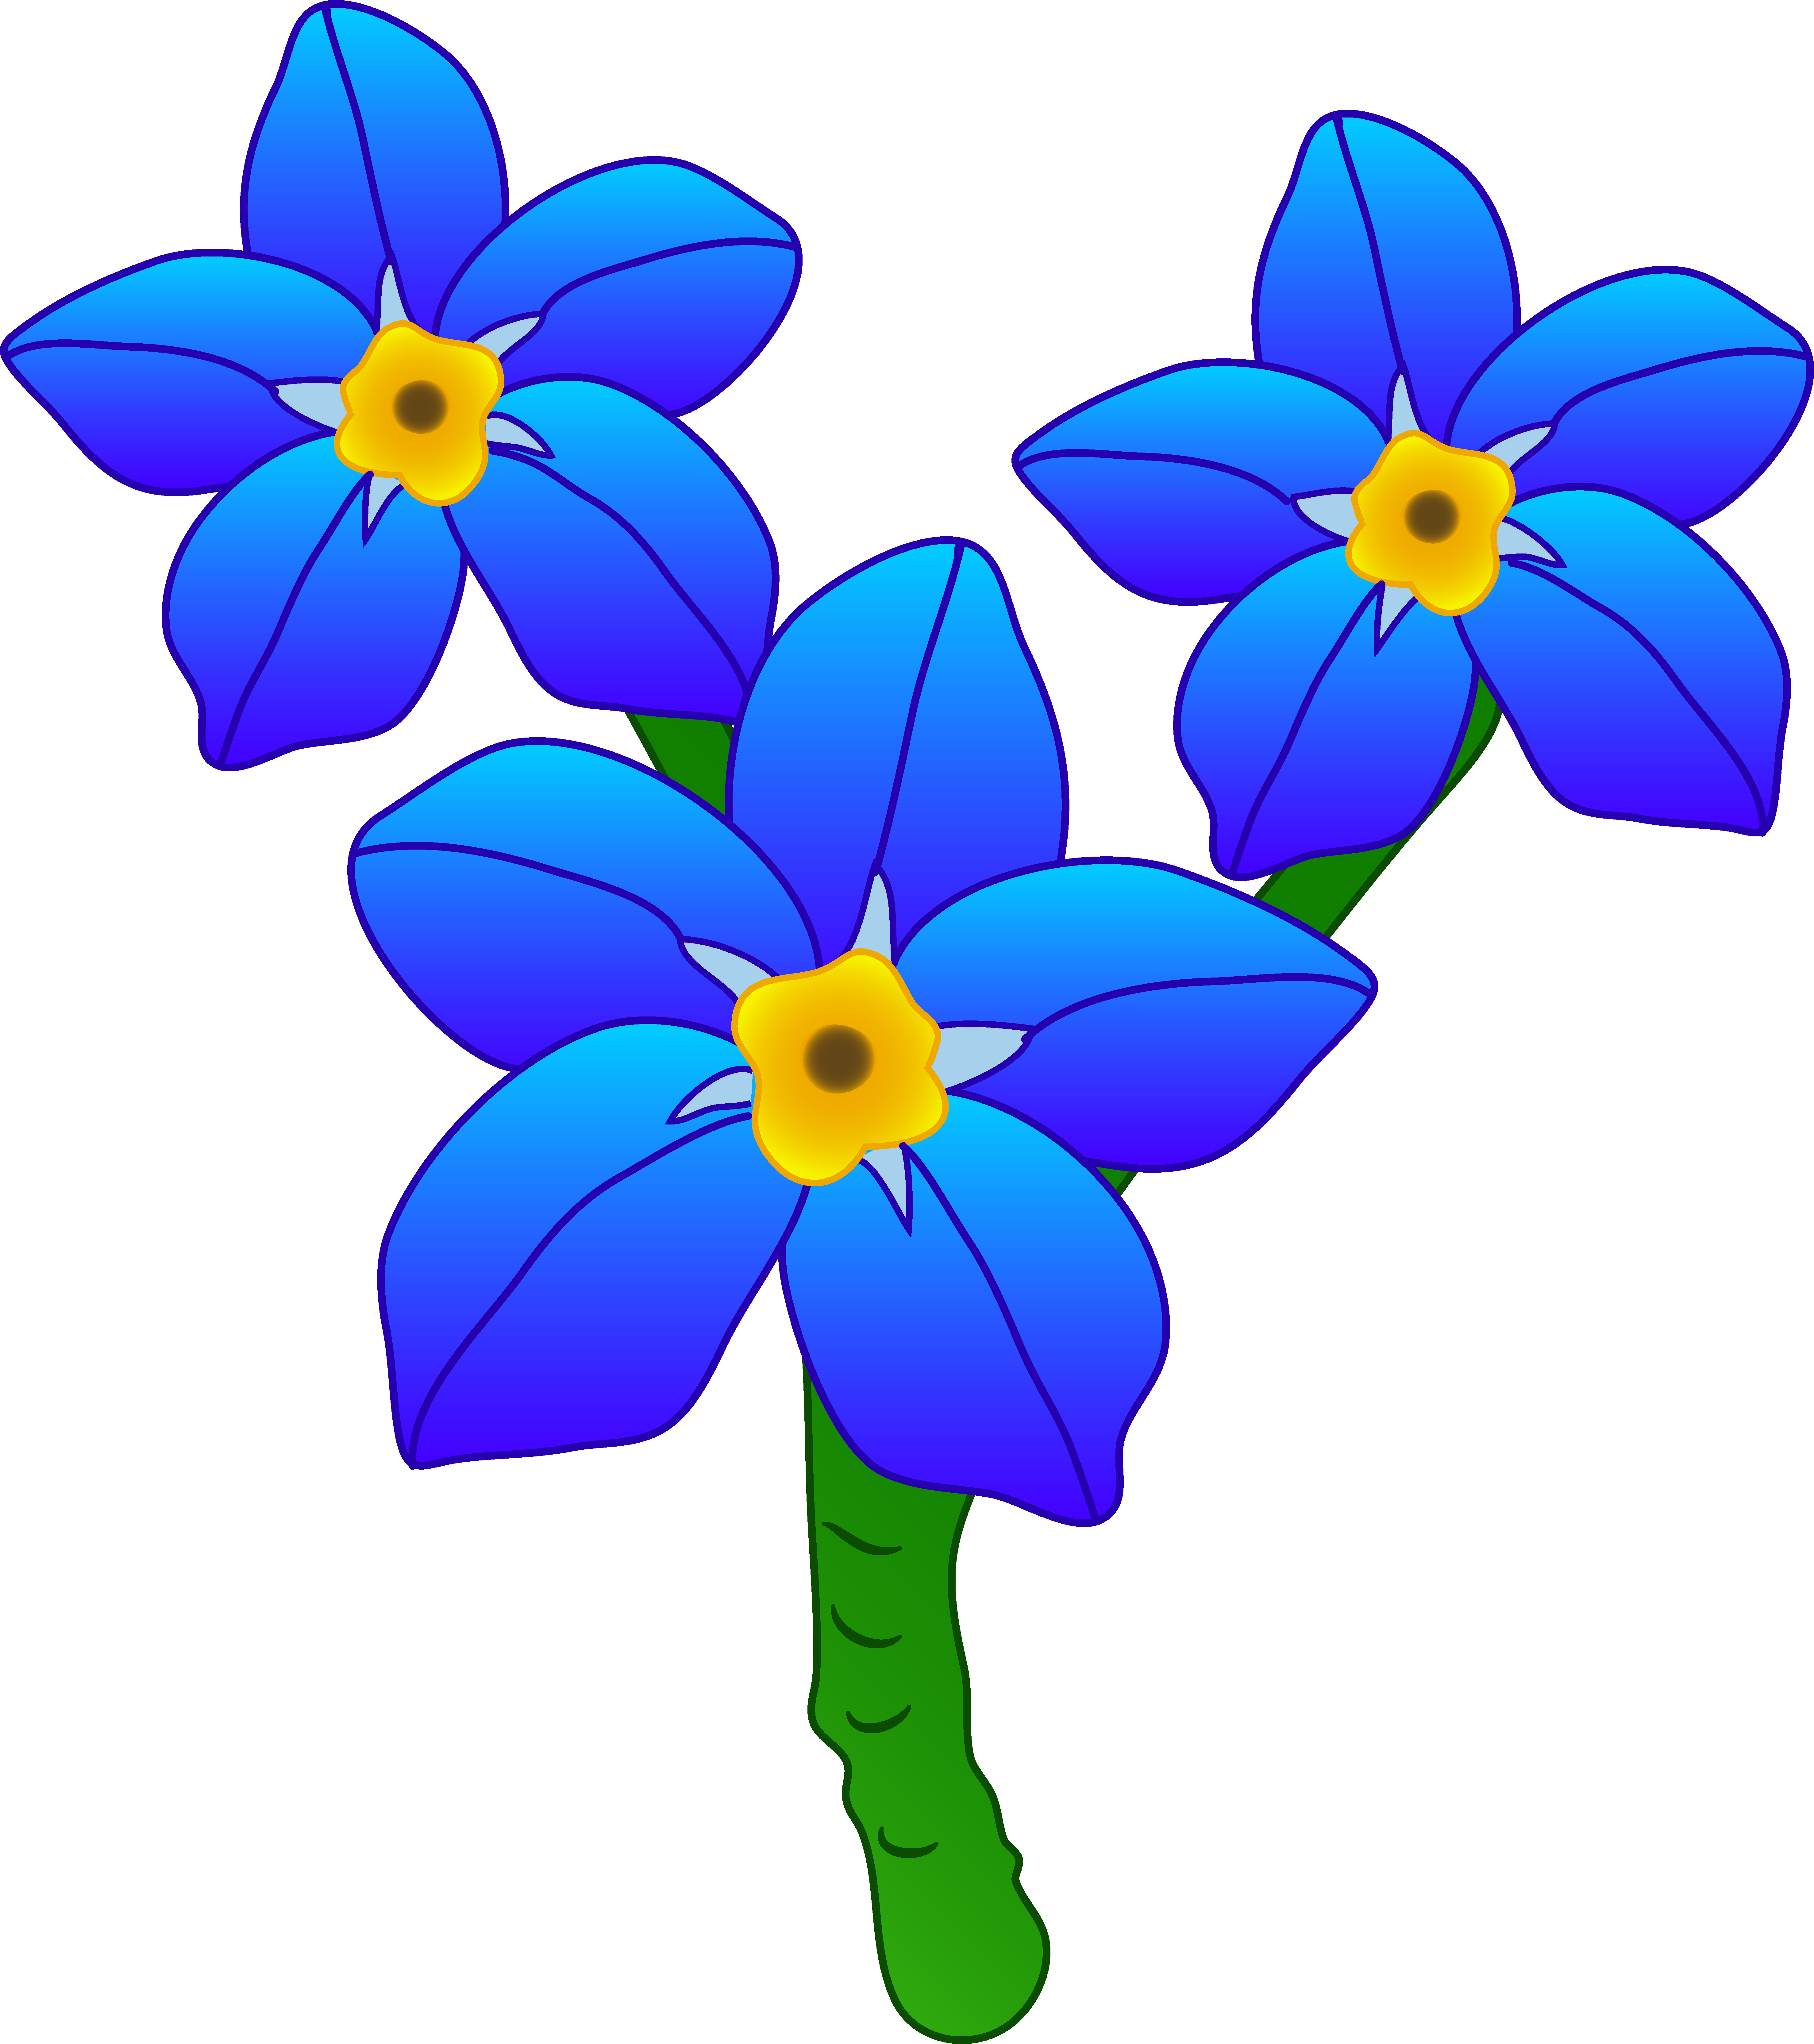 Forget Me Not Flower Clip Art.